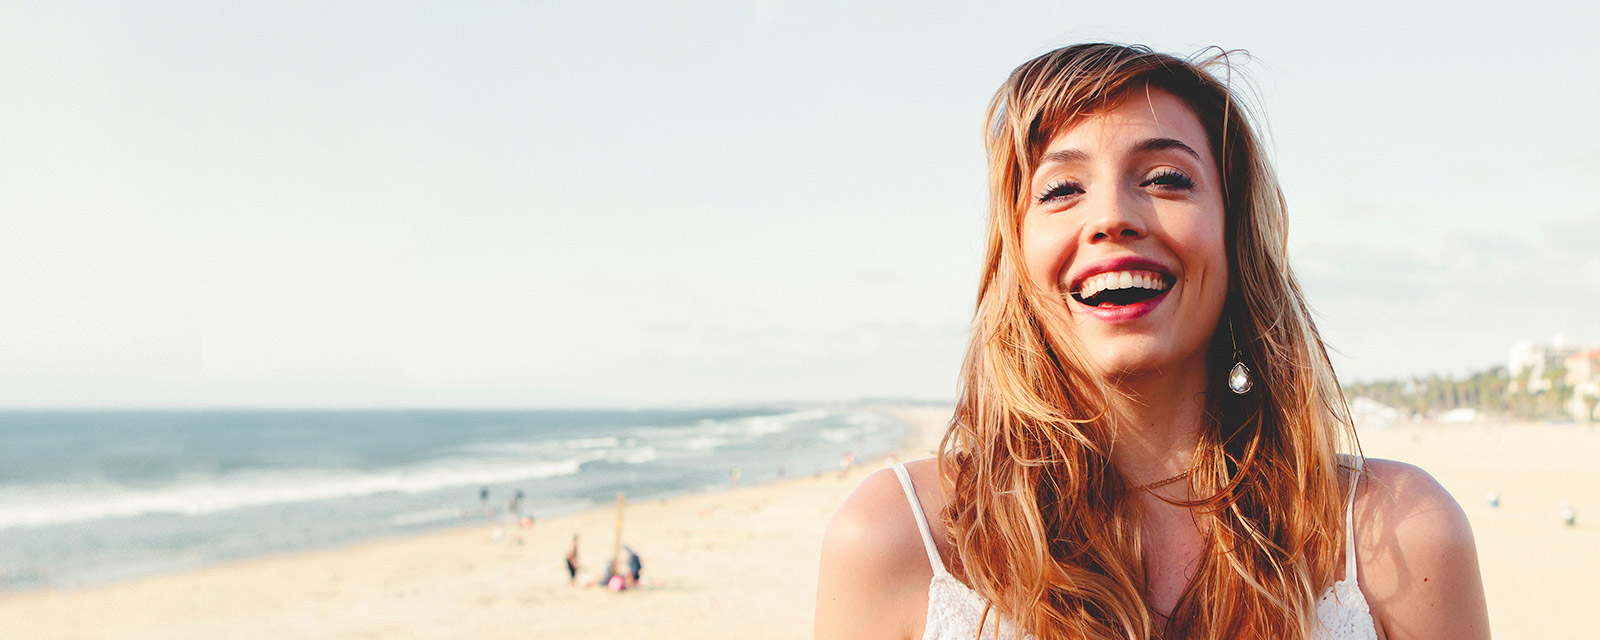 A smiling woman on the beach.